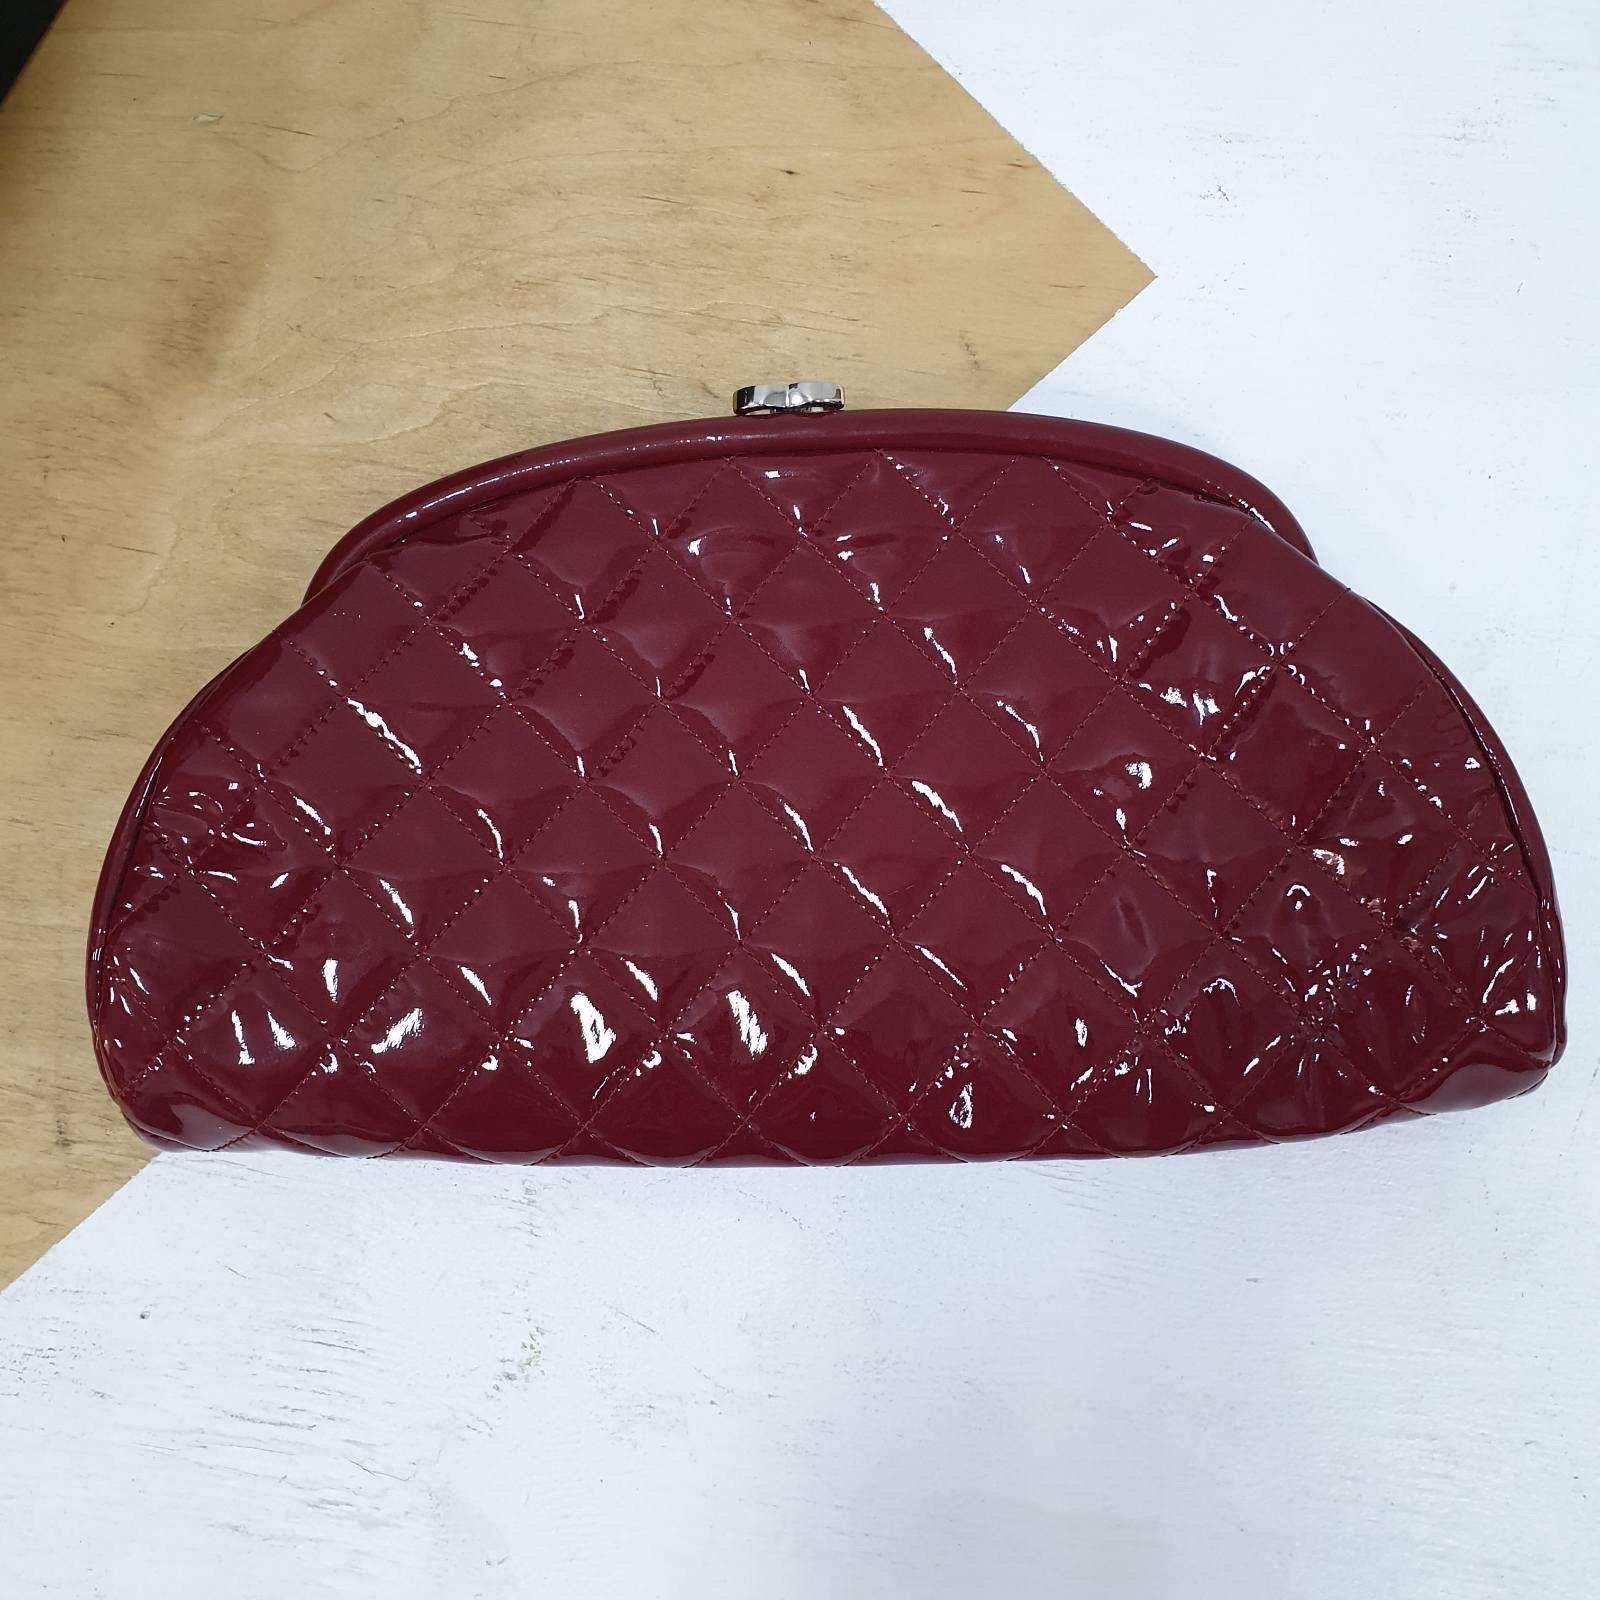 CHANEL clutch patent leather quilted design double cc closure. 
Very good condition. Signs of wear seen on pics
28*16*5 cm
Comes with card.
No box. No dust bag.